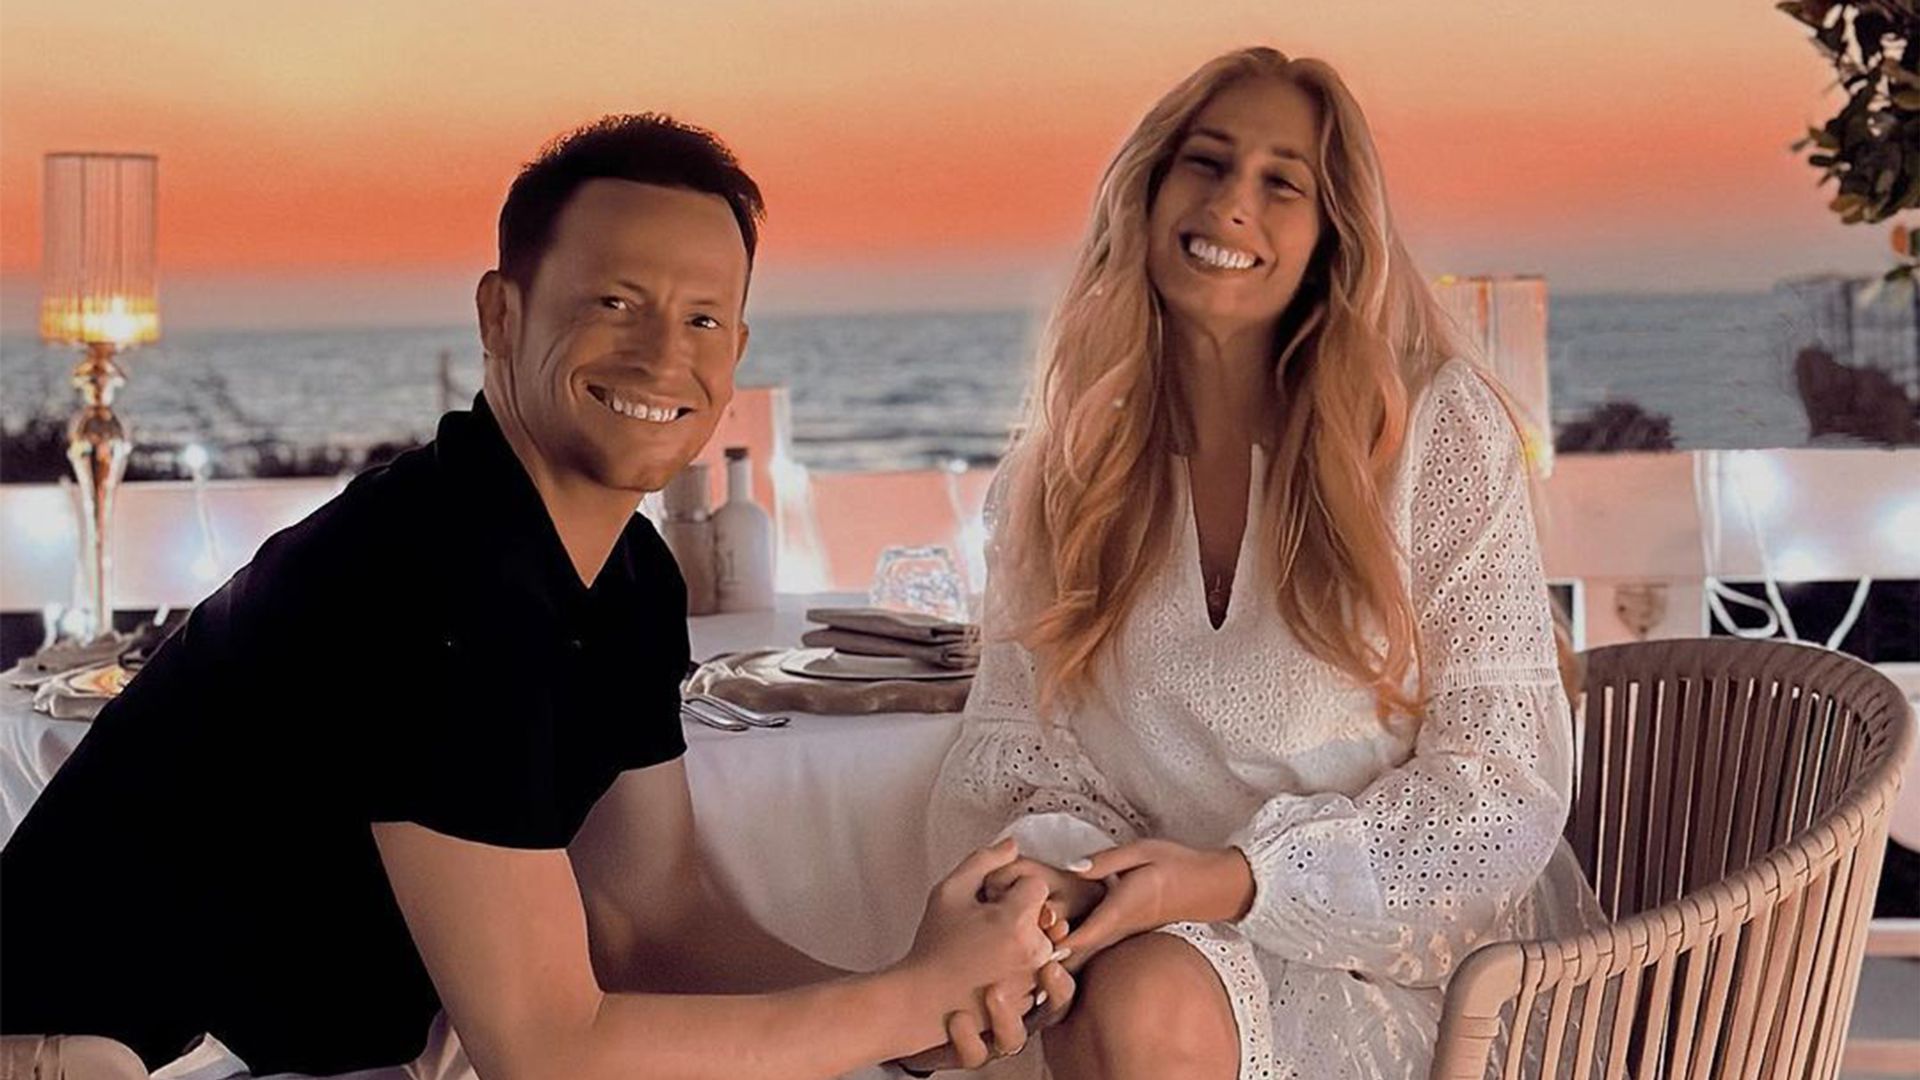 Stacey Solomon and Joe Swash hold hands as they have a romantic dinner